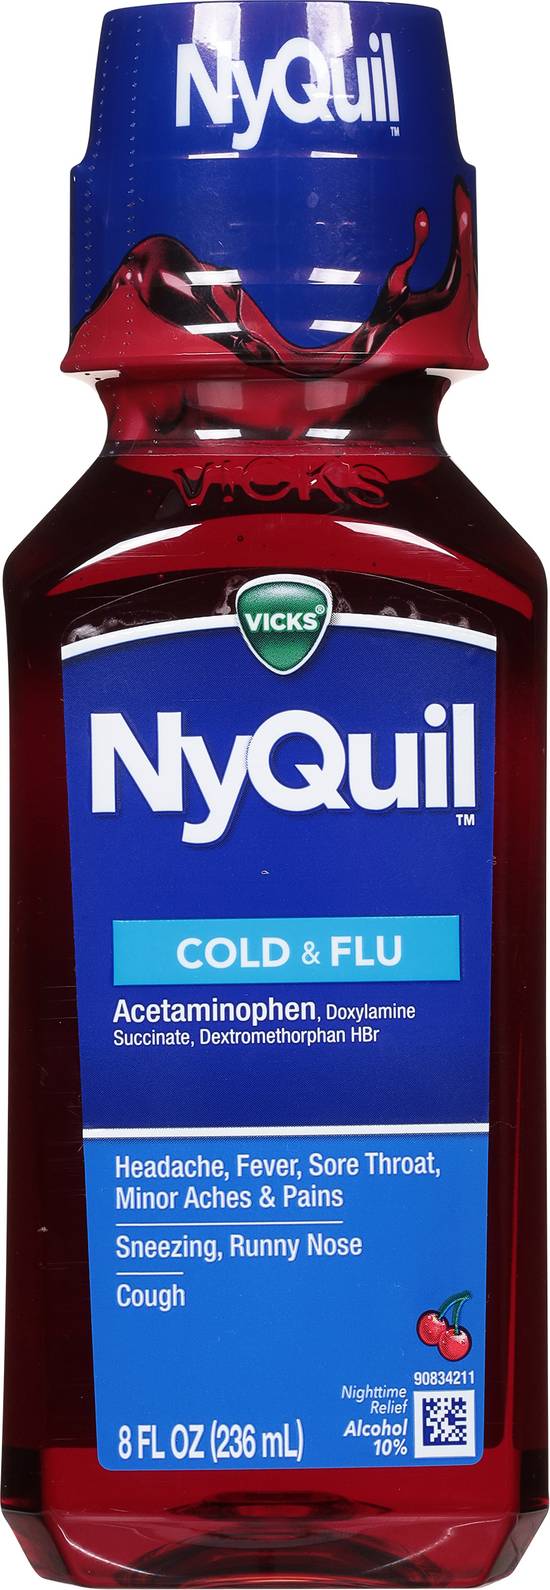 Vicks Nyquil Cold & Flu Cherry Nighttime Relief